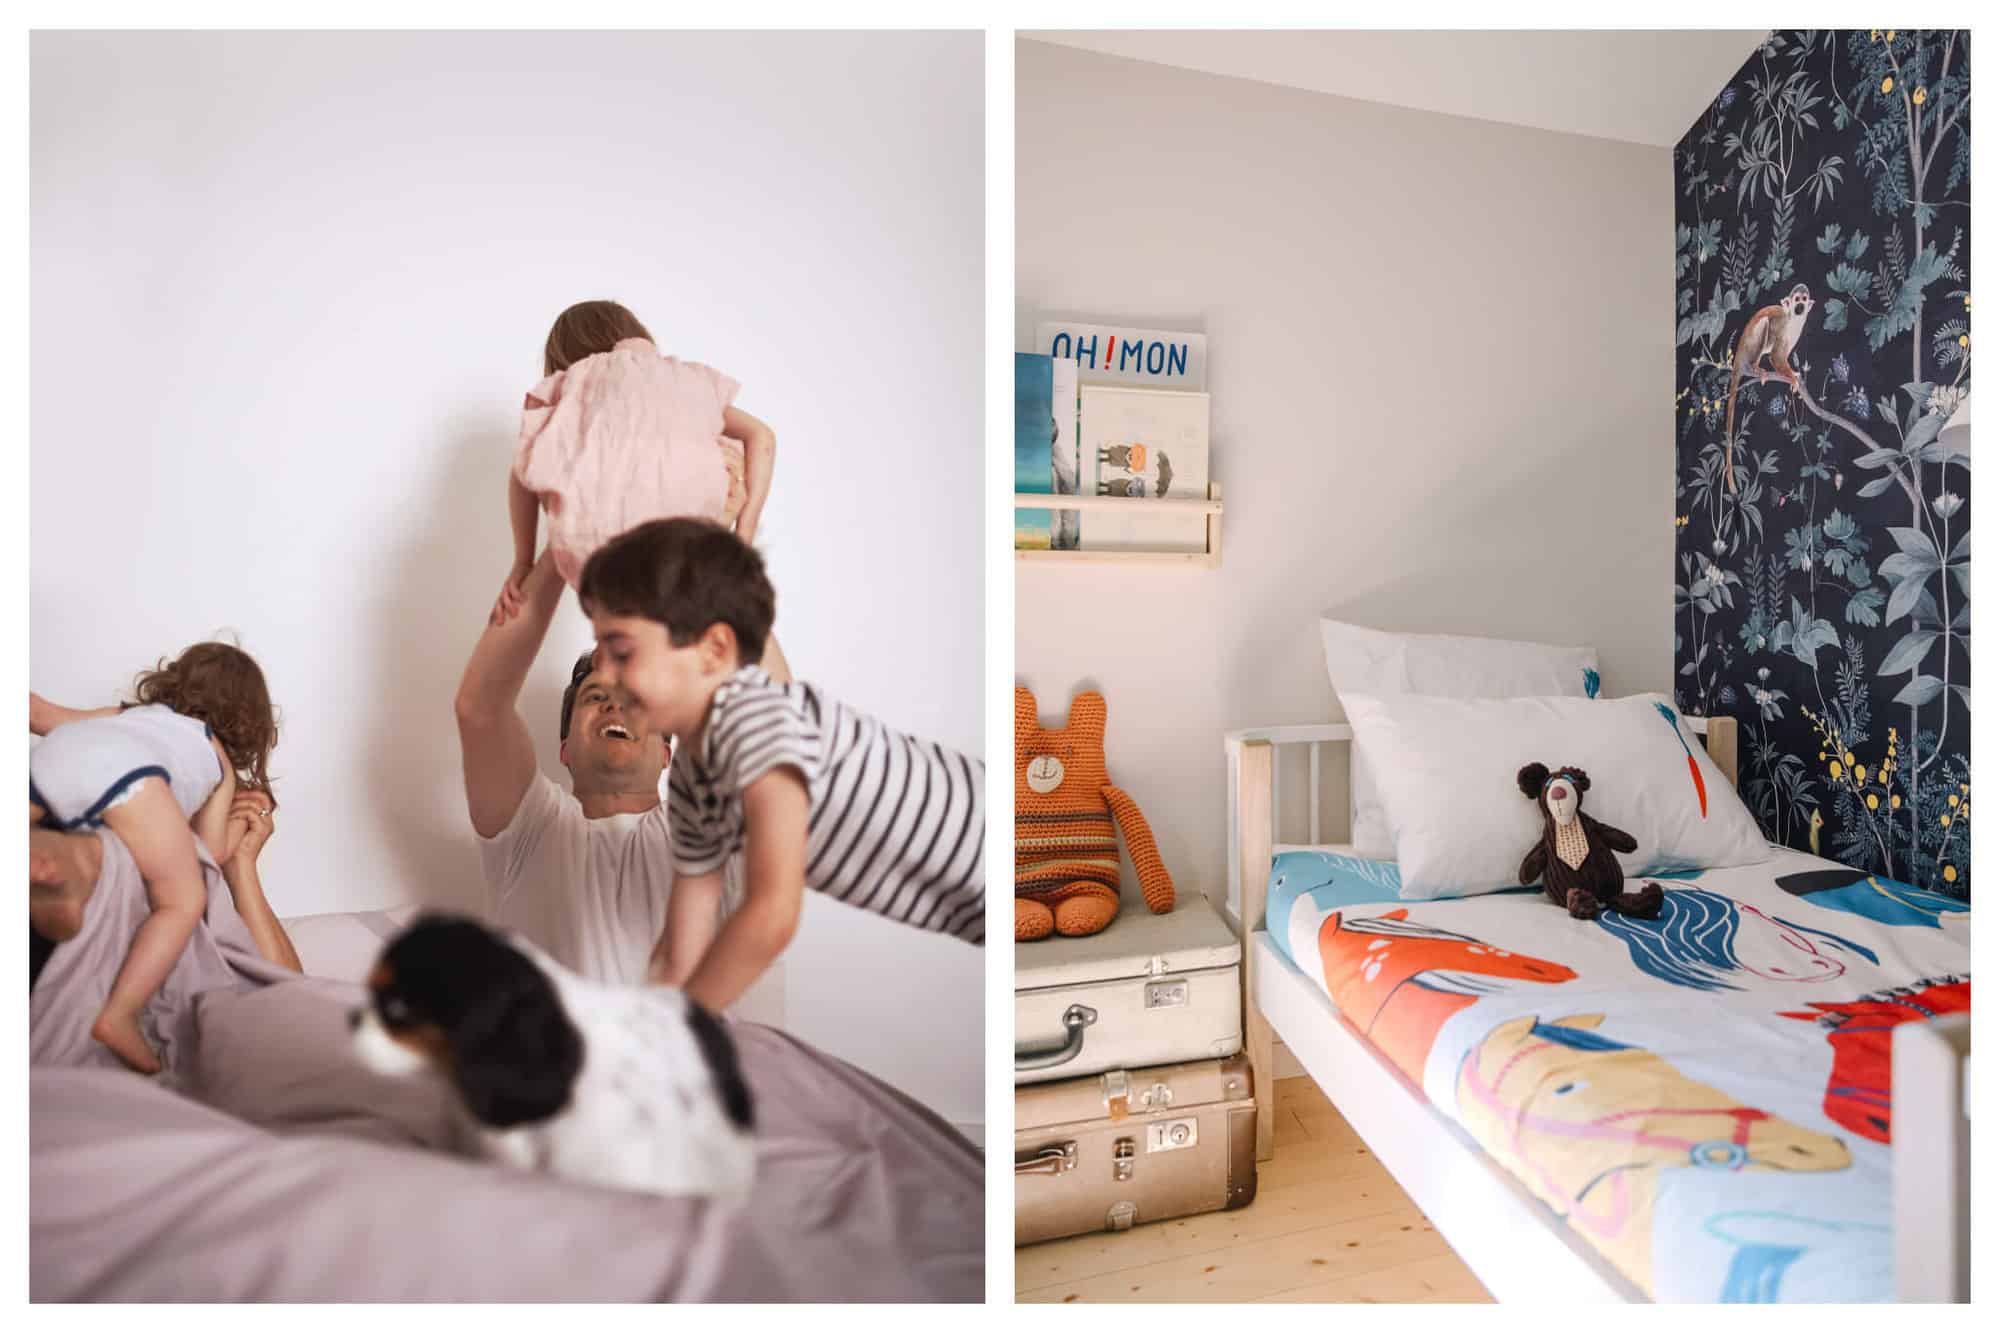 Left: A man, three young children and a dog are on a bed, climbing on one another and playing. Right: A children's room is pictured. One wall is decorated with wallpaper that has plants and a small monkey. The bedspread is white with large colorful images of horses, and there is a stuffed bear on top of the bed. 